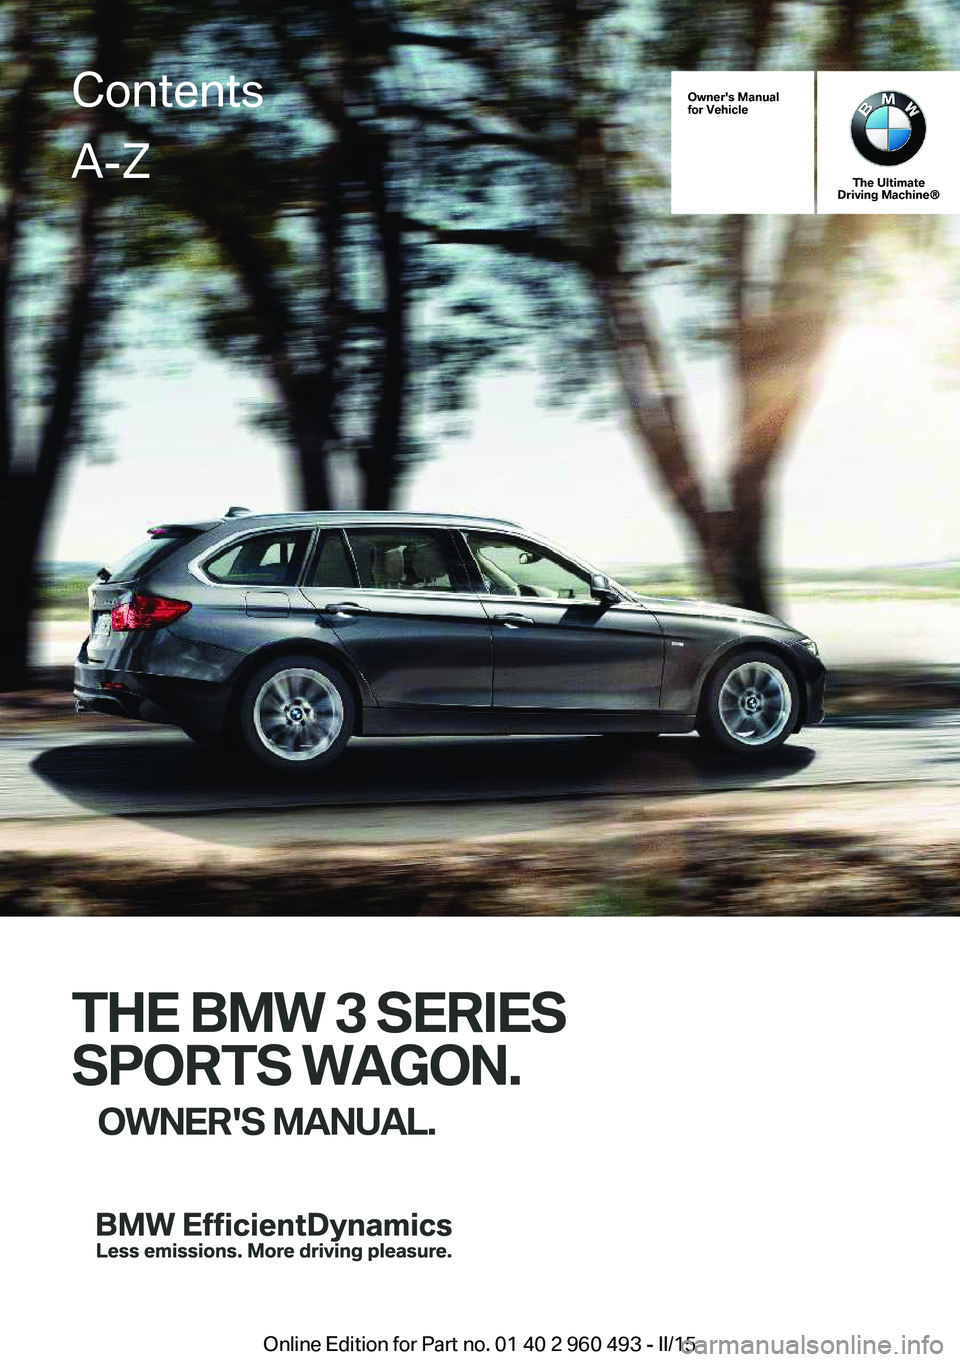 BMW 328D XDRIVE SPORTS WAGON 2015  Owners Manual Owner's Manual
for Vehicle
The Ultimate
Driving Machine®
THE BMW 3 SERIES
SPORTS WAGON. OWNER'S MANUAL.
ContentsA-Z
Online Edition for Part no. 01 40 2 960 493 - II/15   